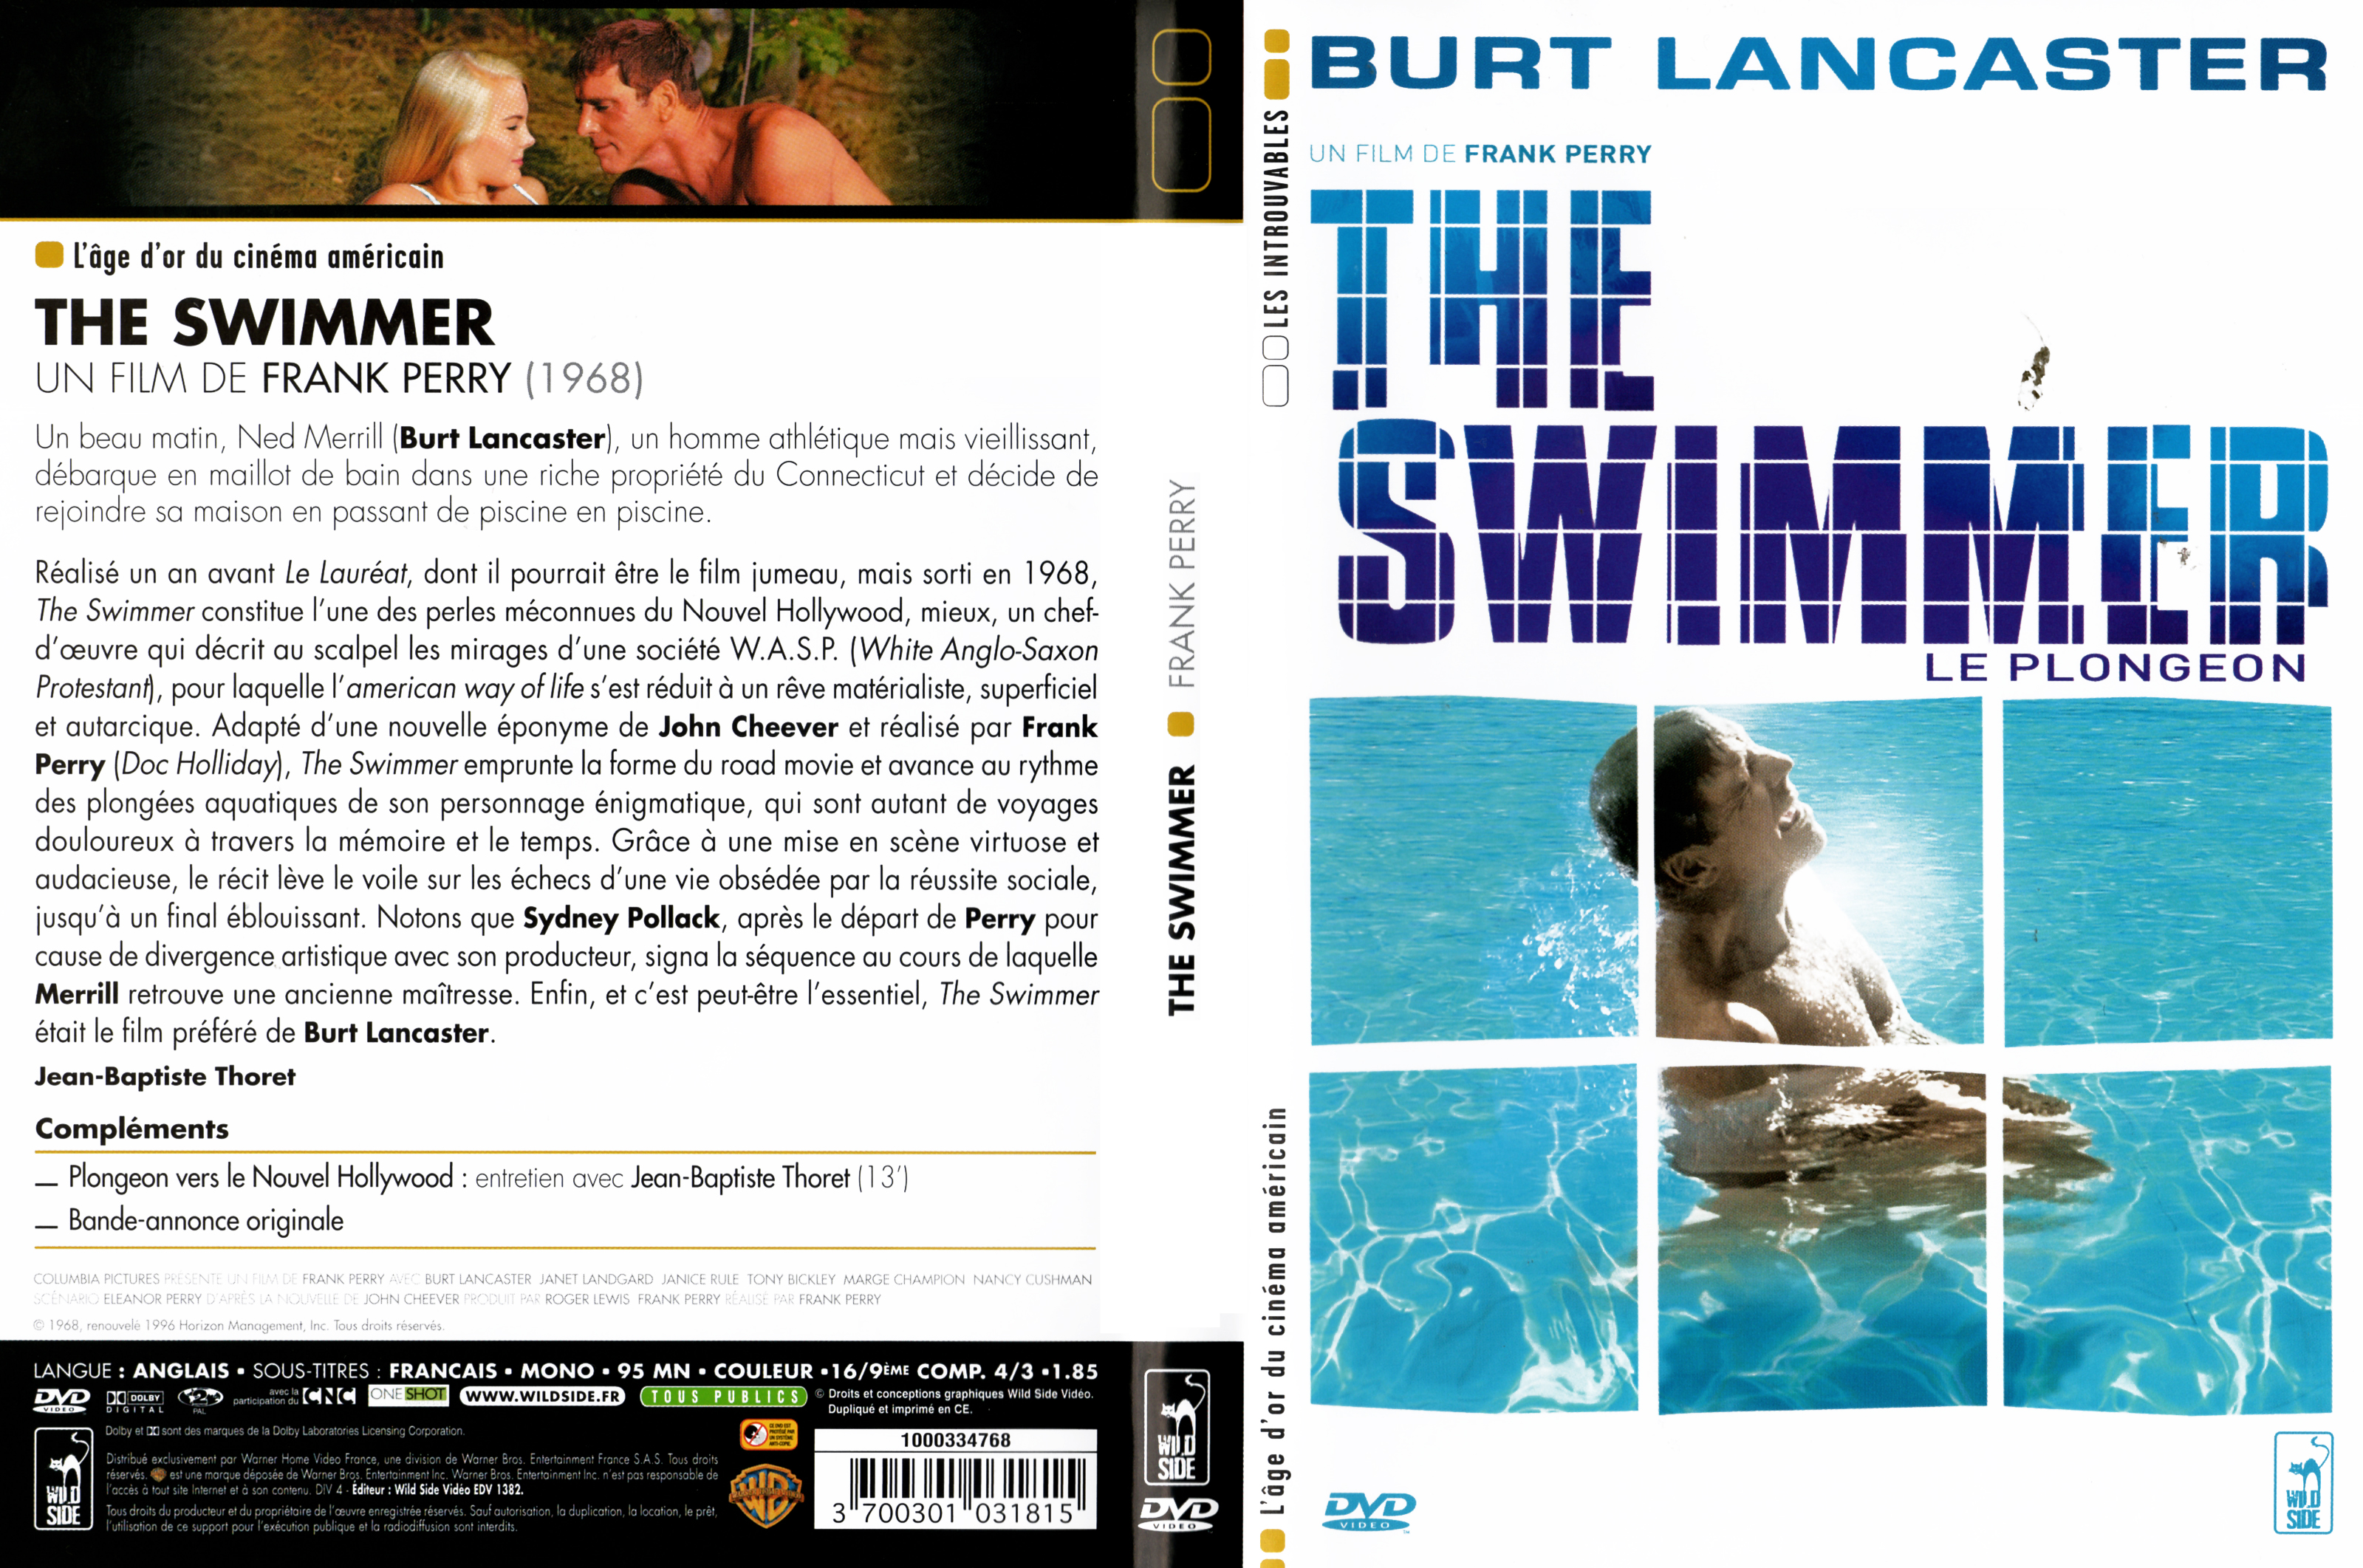 Jaquette DVD The swimmer